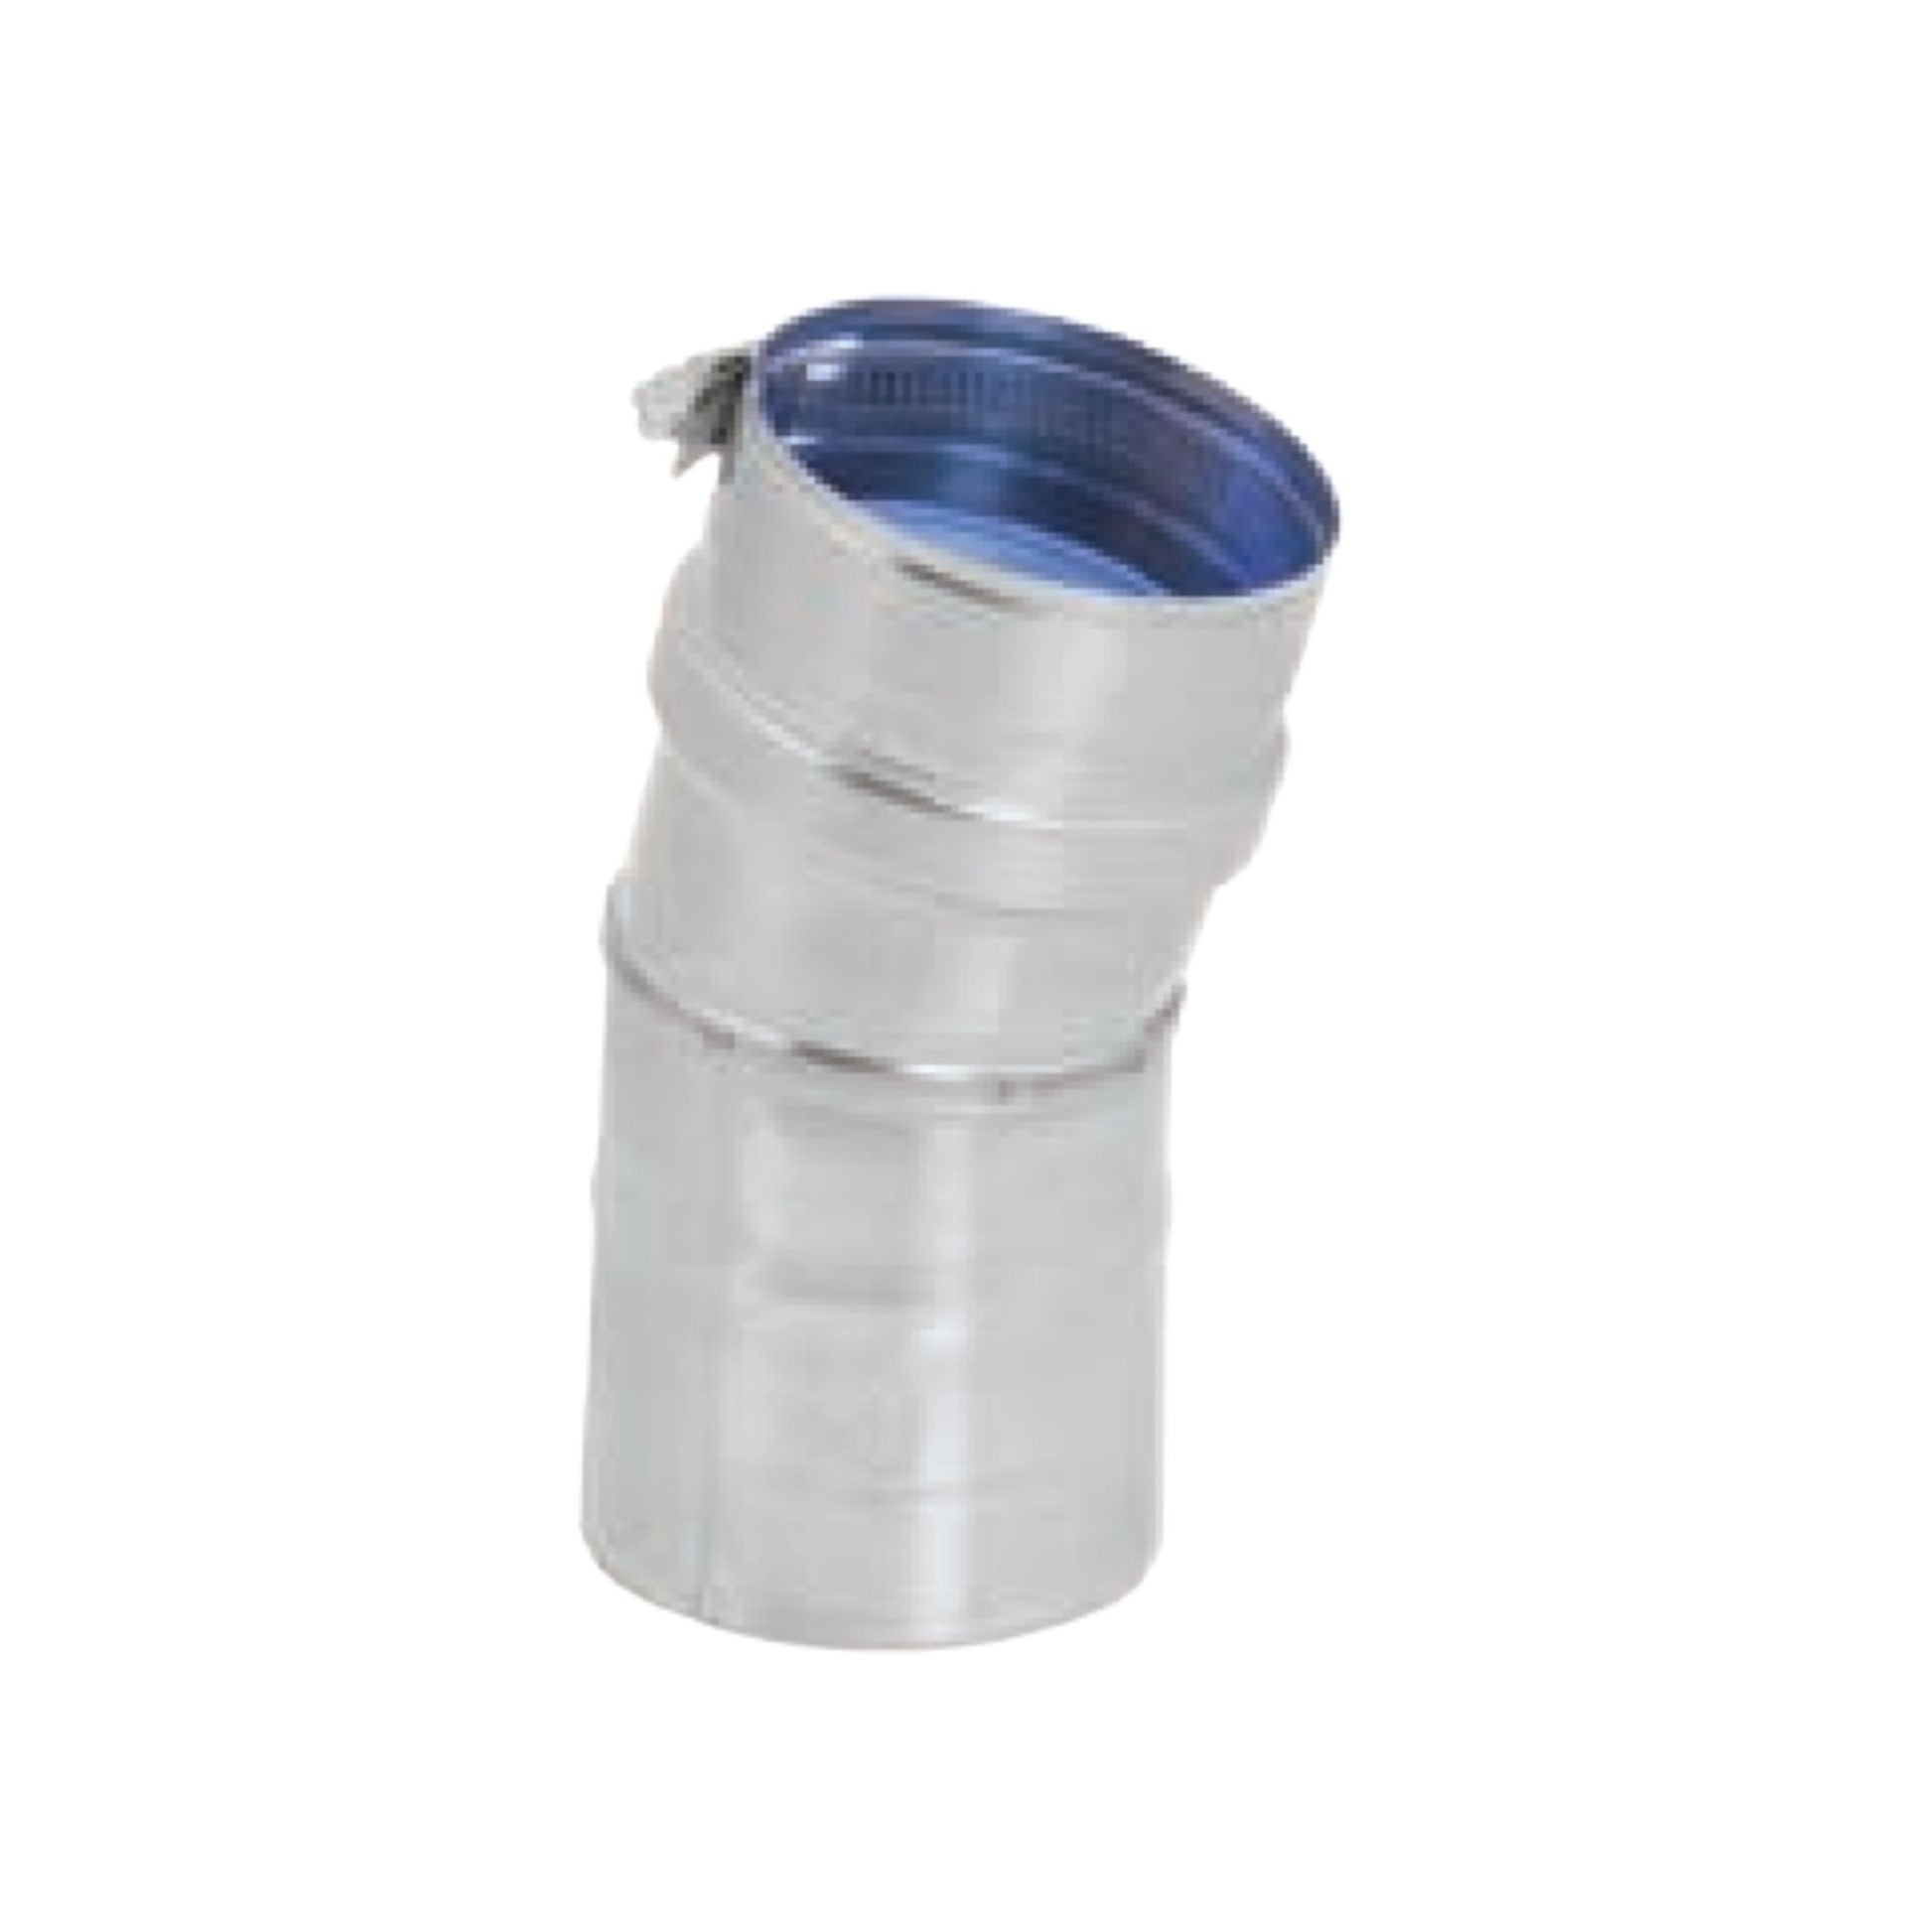 DuraVent FasNSeal 6" 15 Degree 29-4C Stainless Steel Elbow